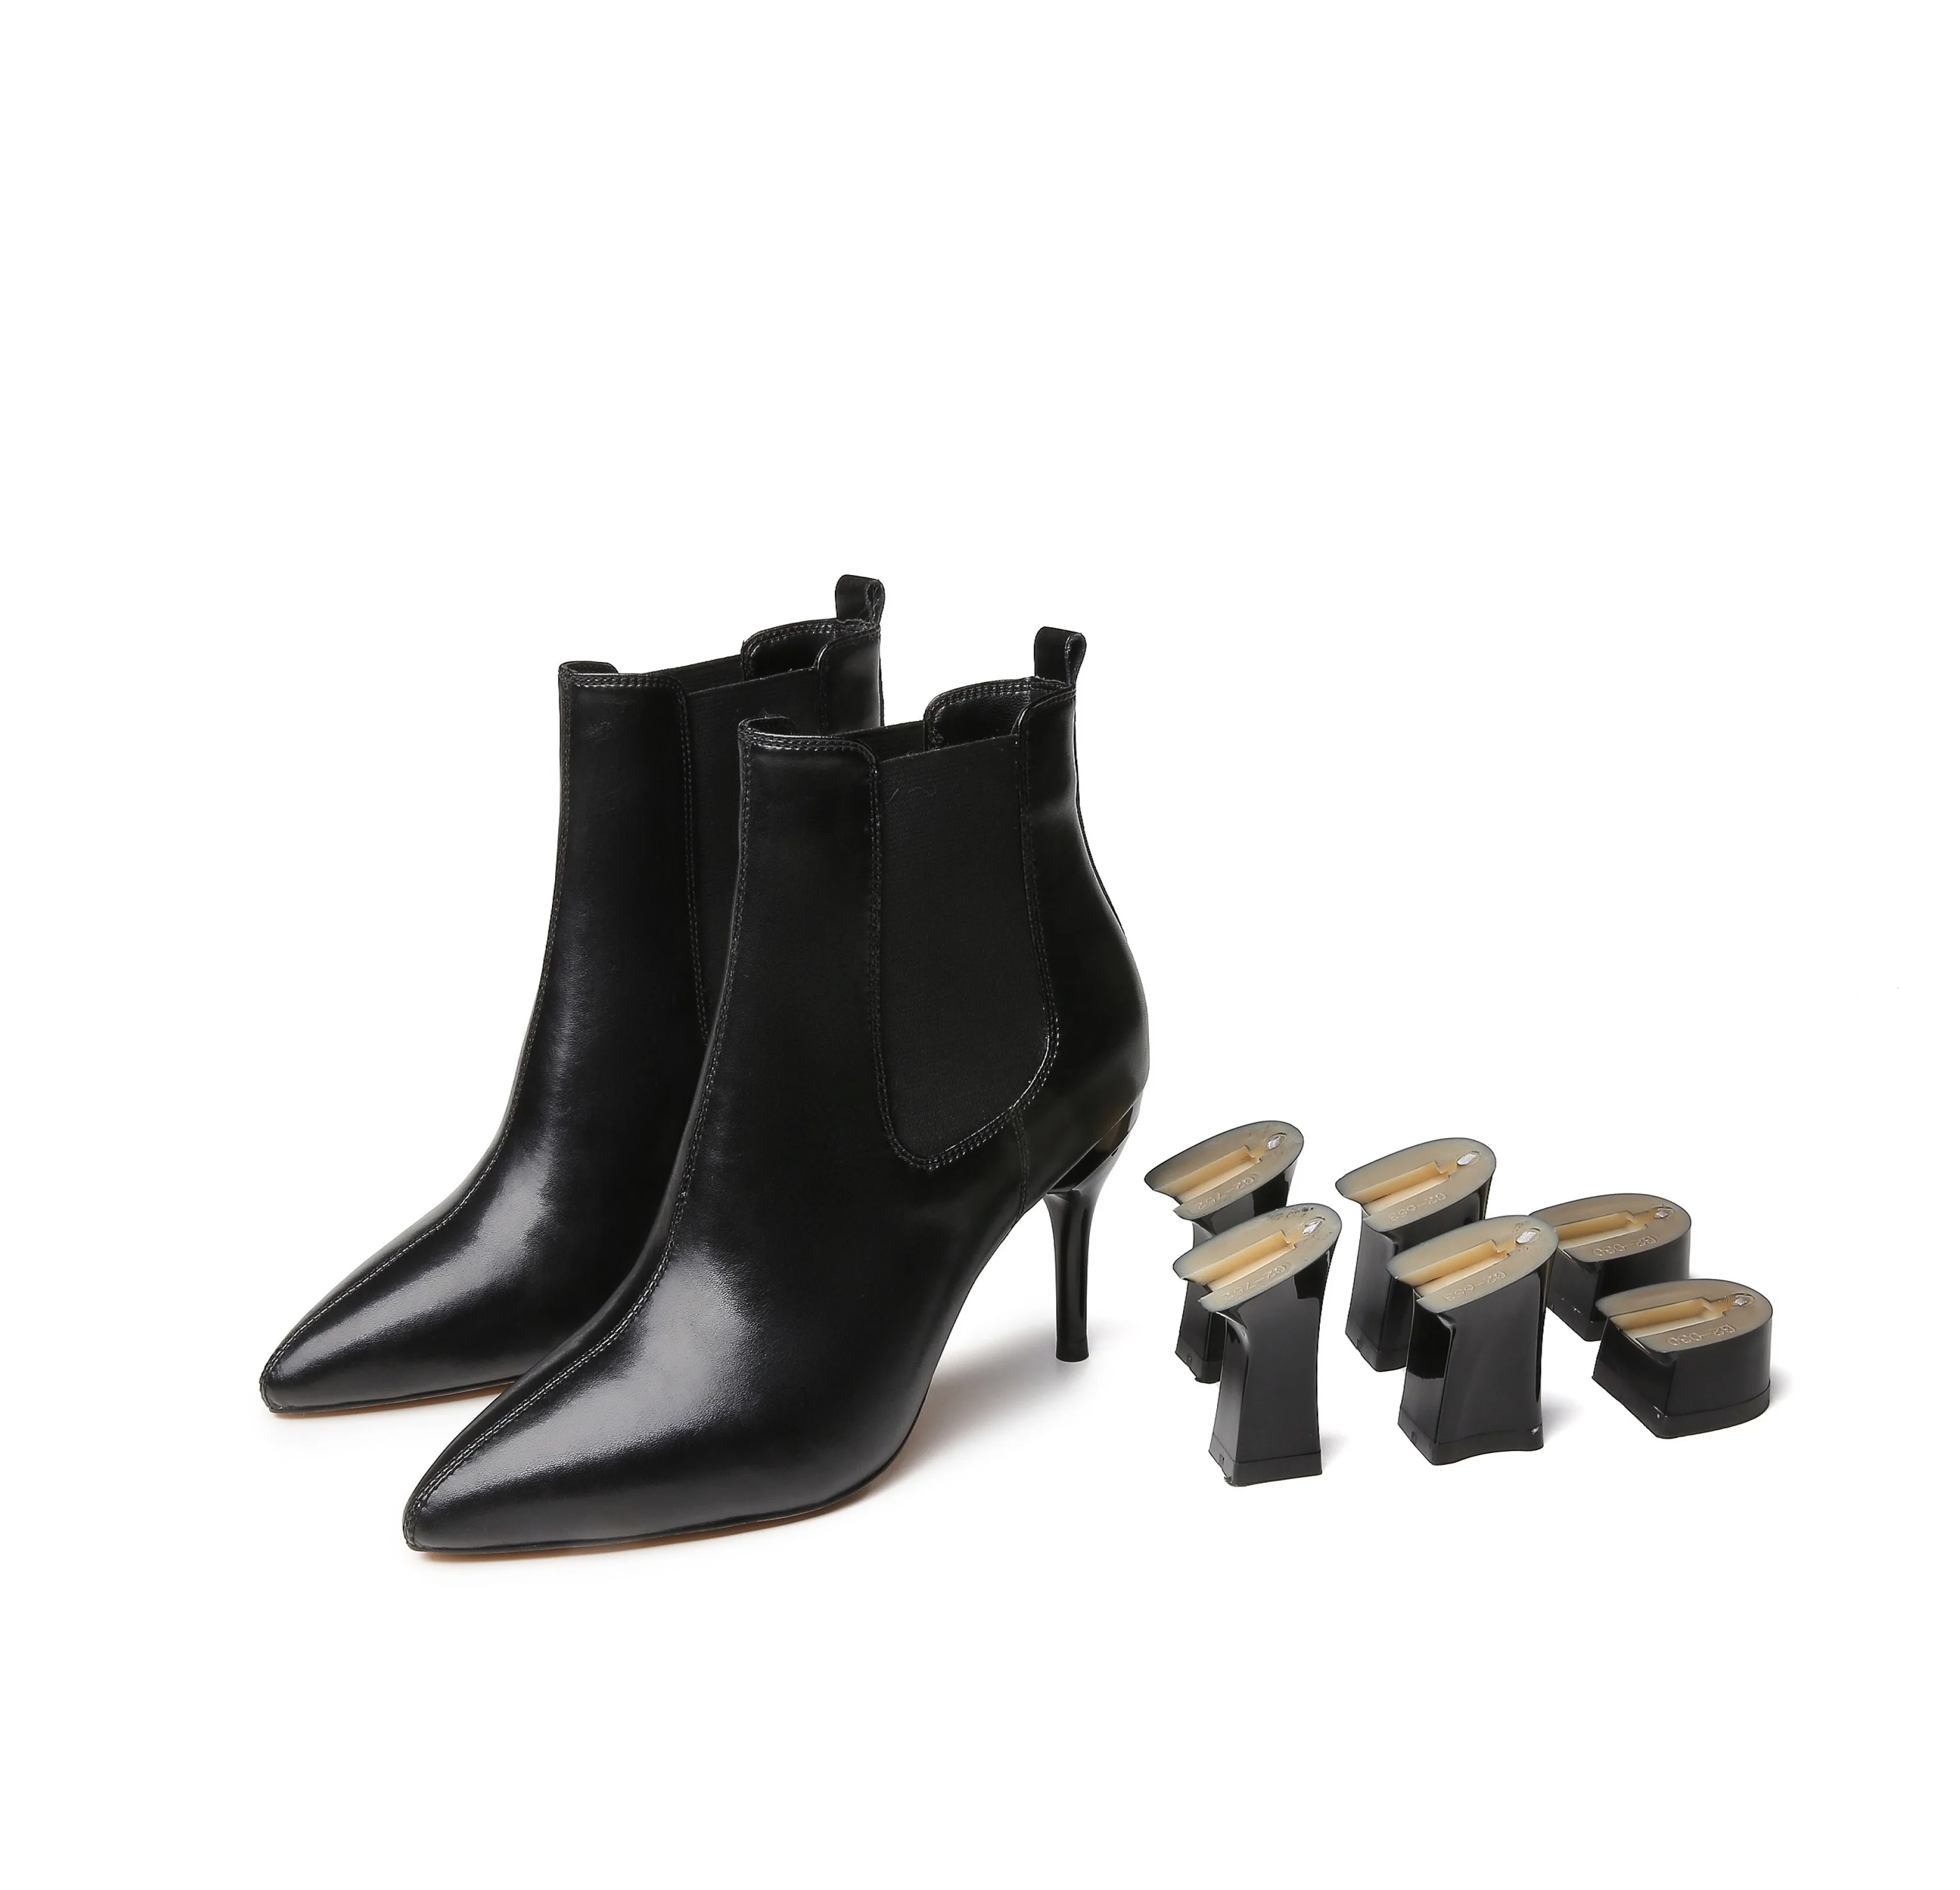 The newest black boots for women’s fashion in 2021 are convertible heels change boots